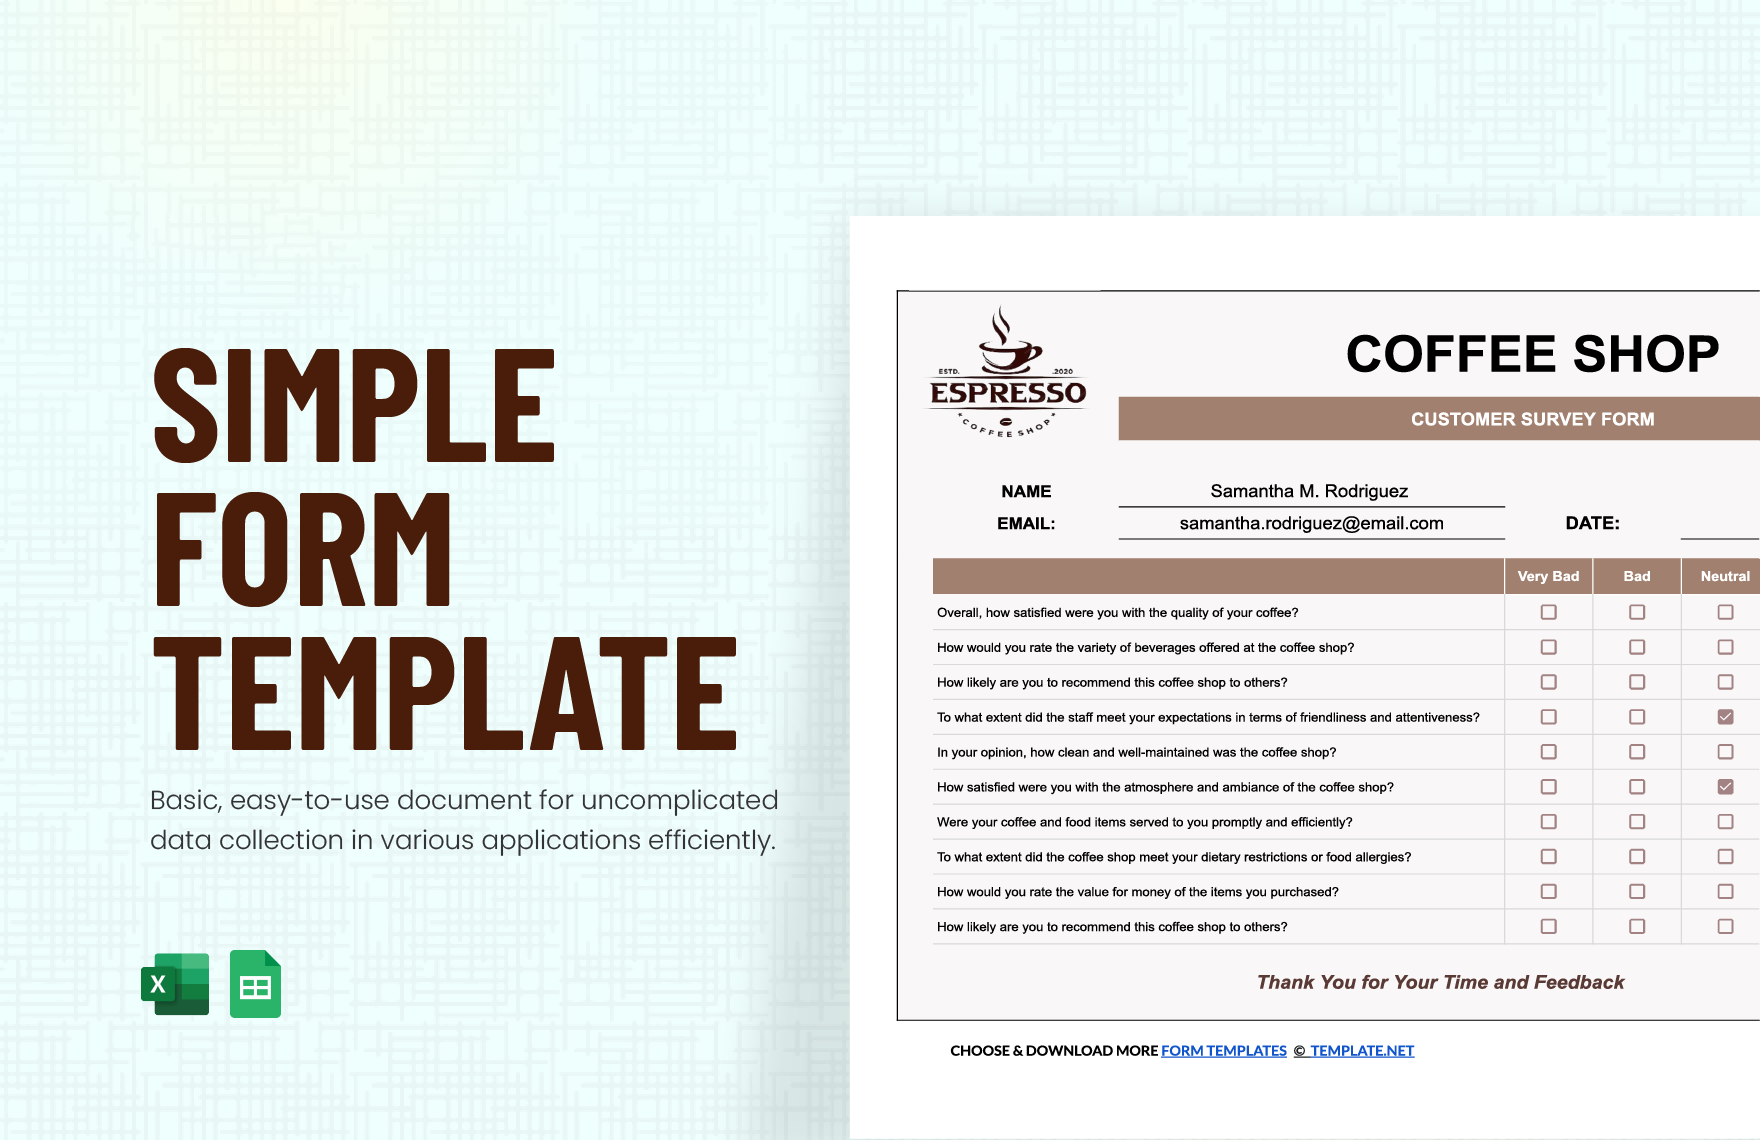 Free Simple Form Template in Excel, Google Sheets